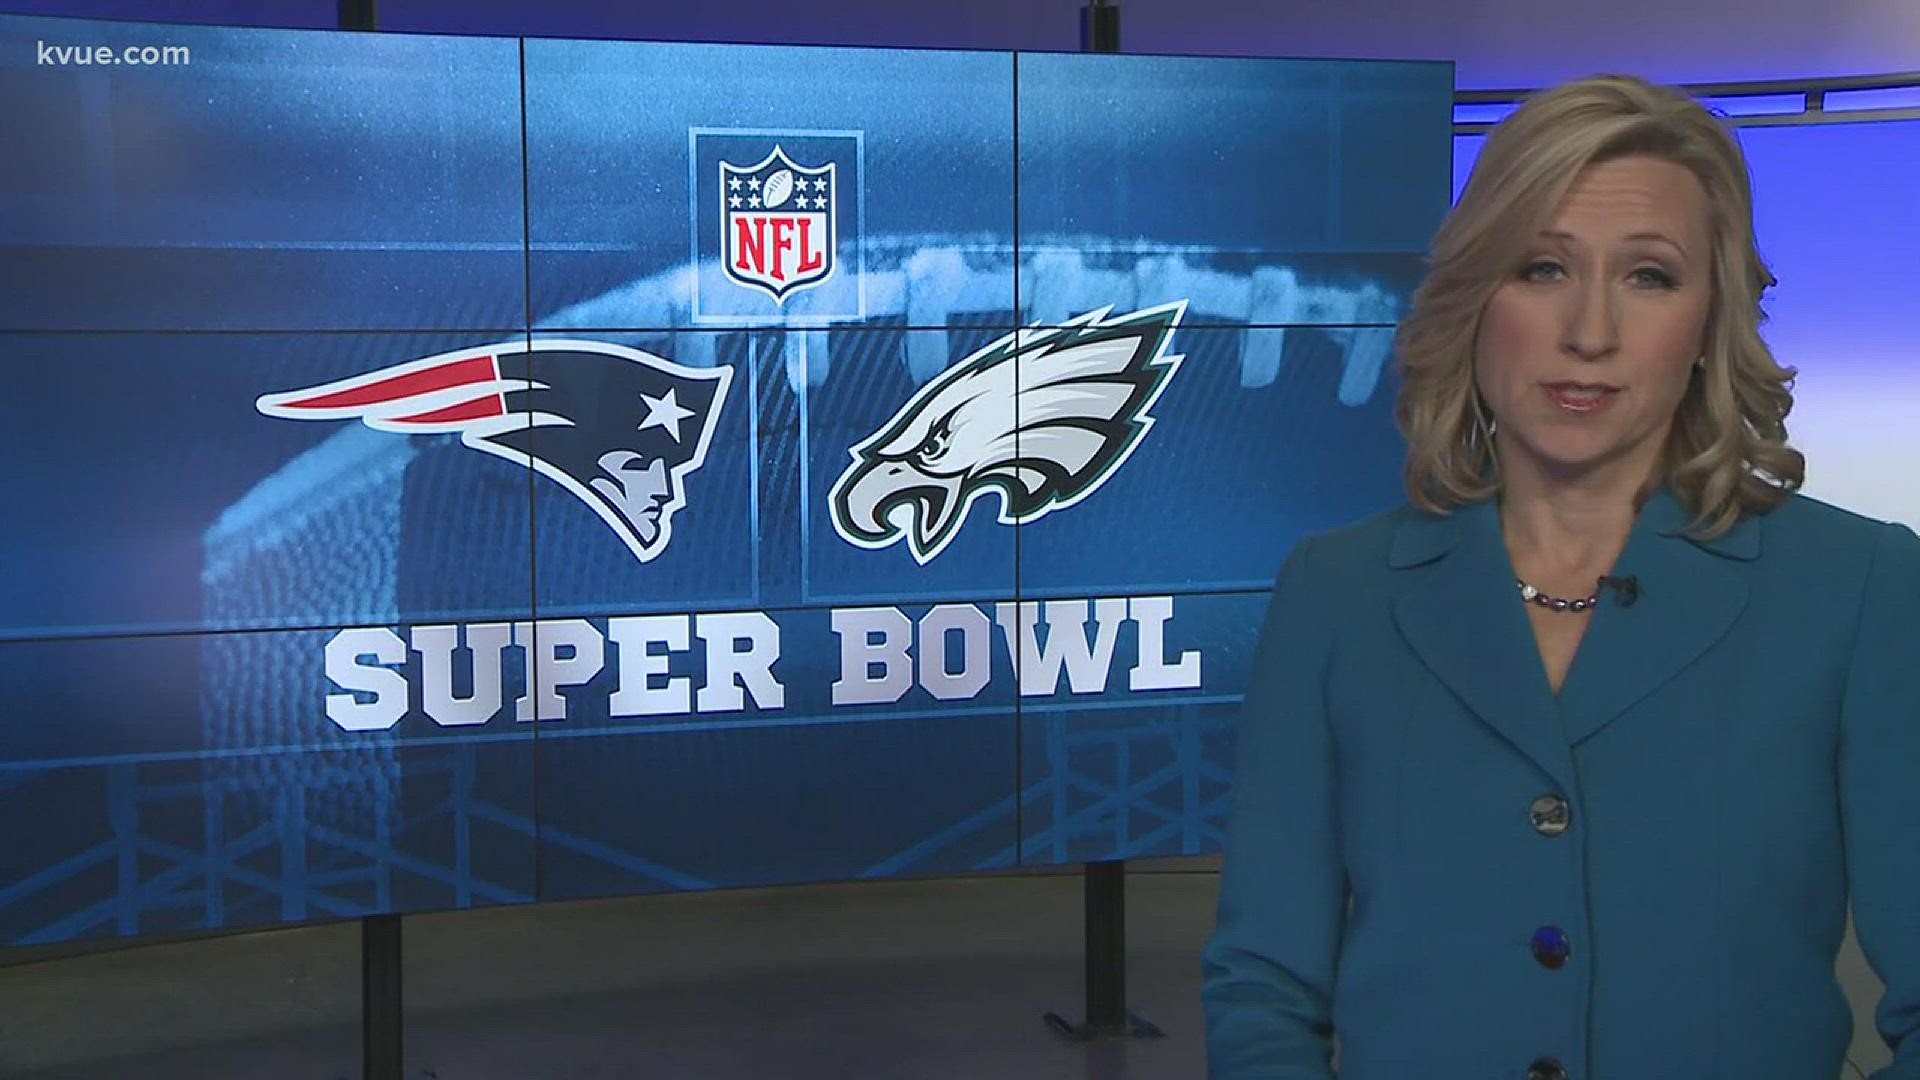 After Gisele Brady's post-Super Bowl remarks on teaching her kids a lesson went viral. KVUE's Terri Gruca shared her thoughts on how kids should handle losing.